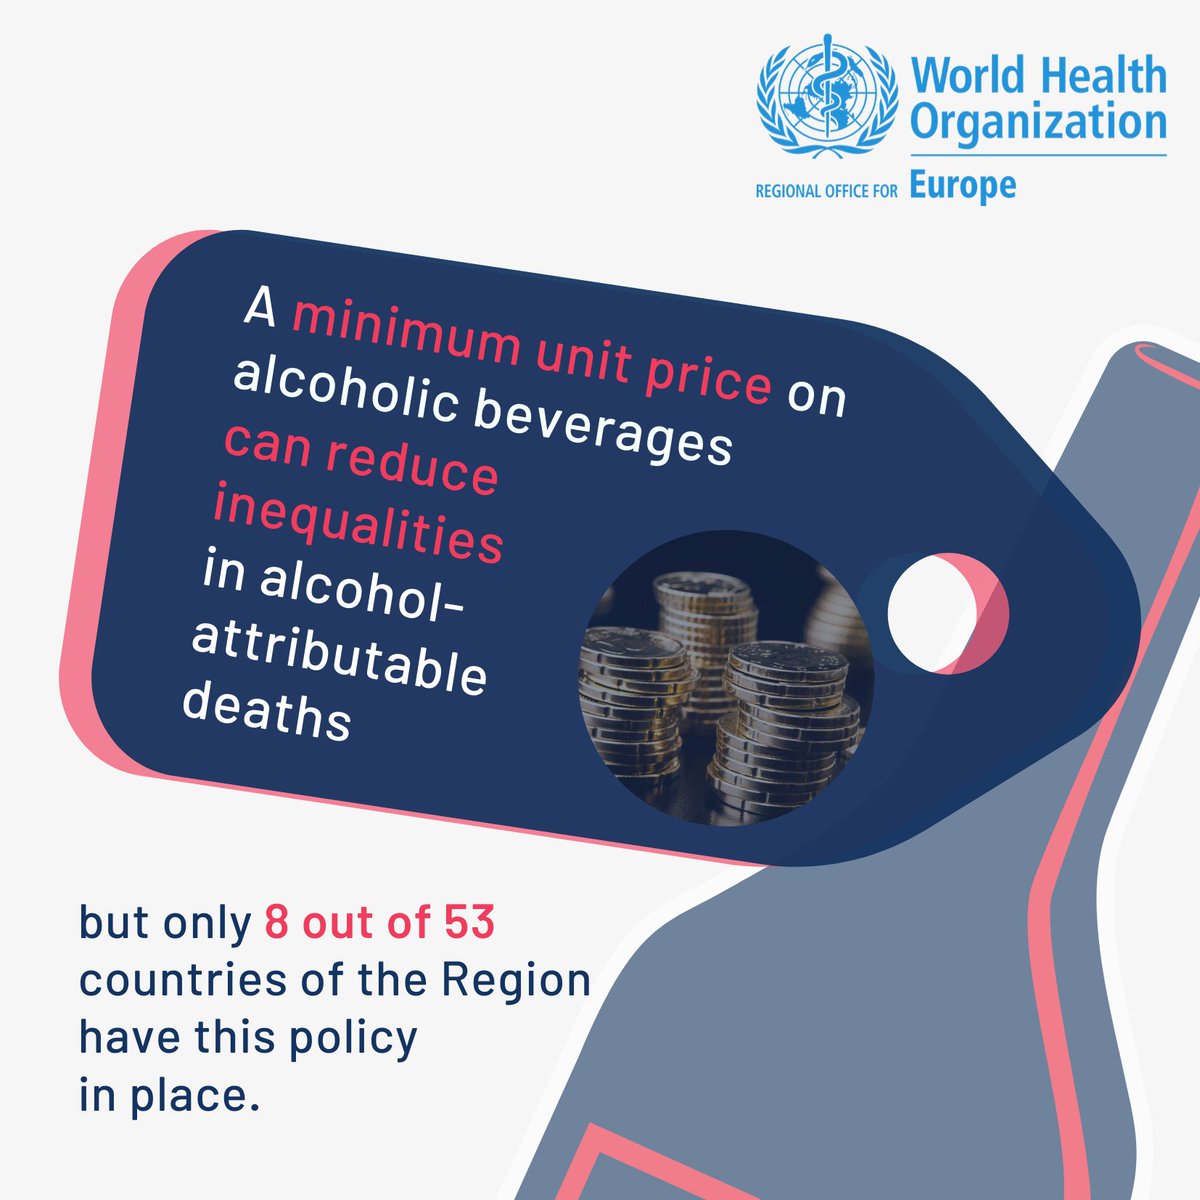 Evidence shows that a minimum unit price on alcoholic beverages is a powerful tool that can reduce inequalities in alcohol-attributable deaths, but only  out of  countries of the Region have this policy in place.